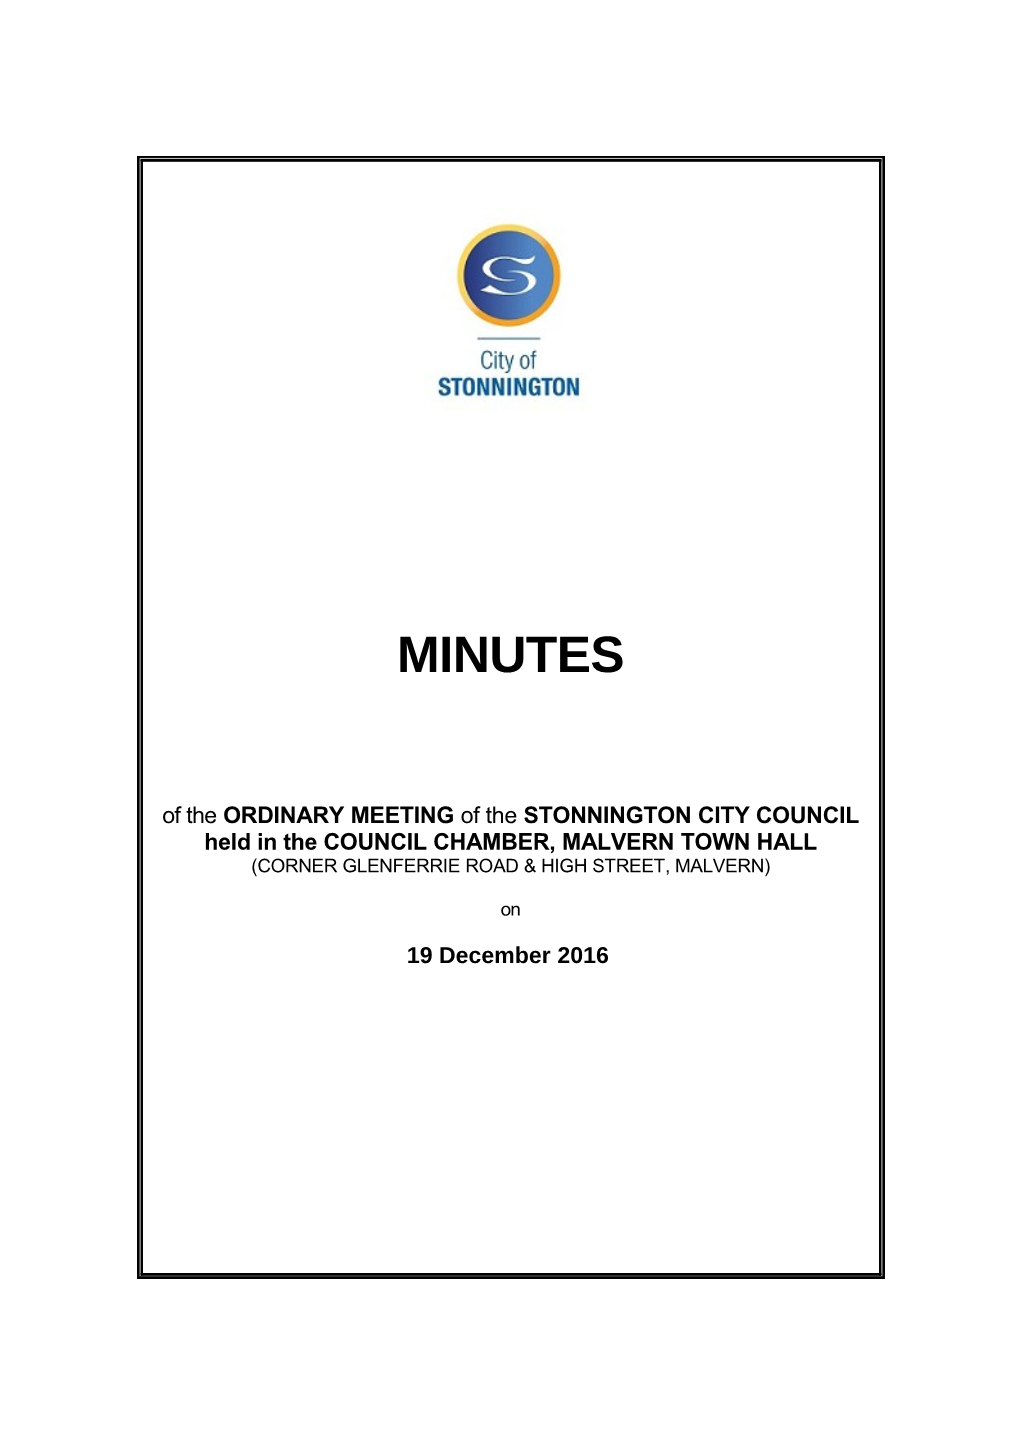 Minutes of Council Meeting - 19 December 2016